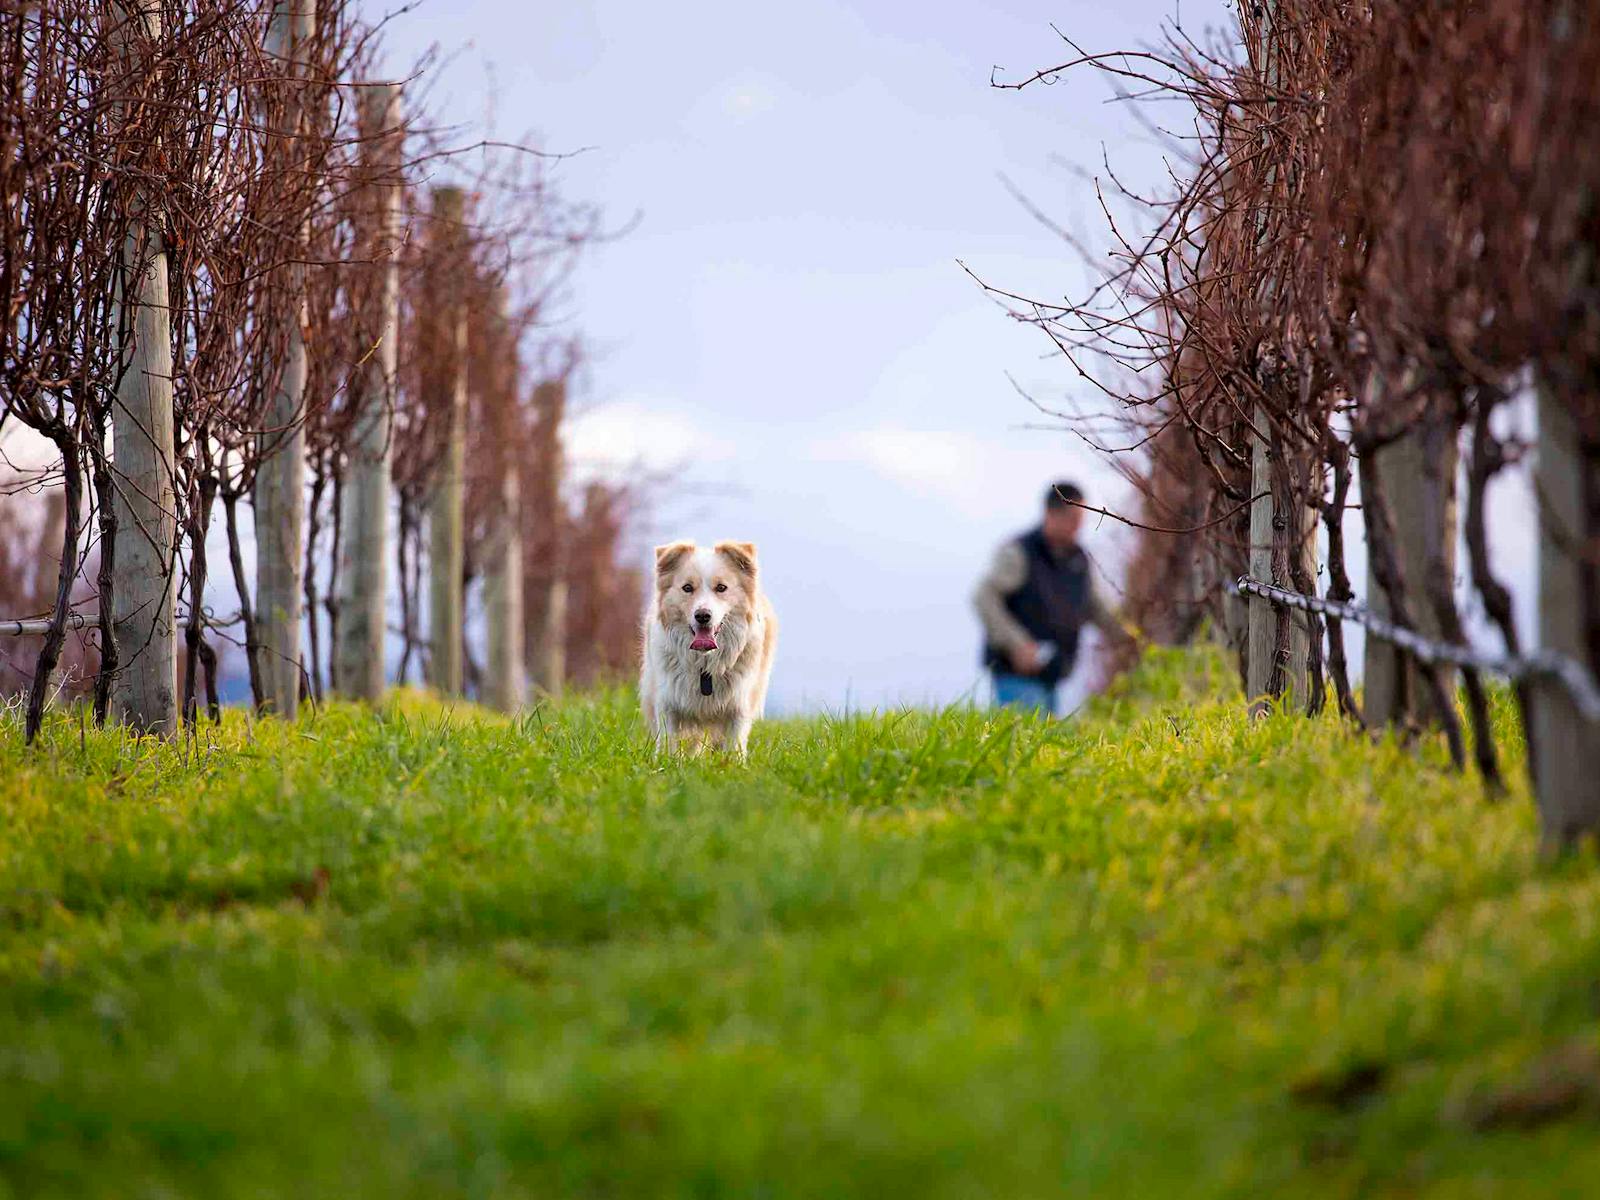 Bangor Wine in the Vines Tour - experience a working country vineyard.